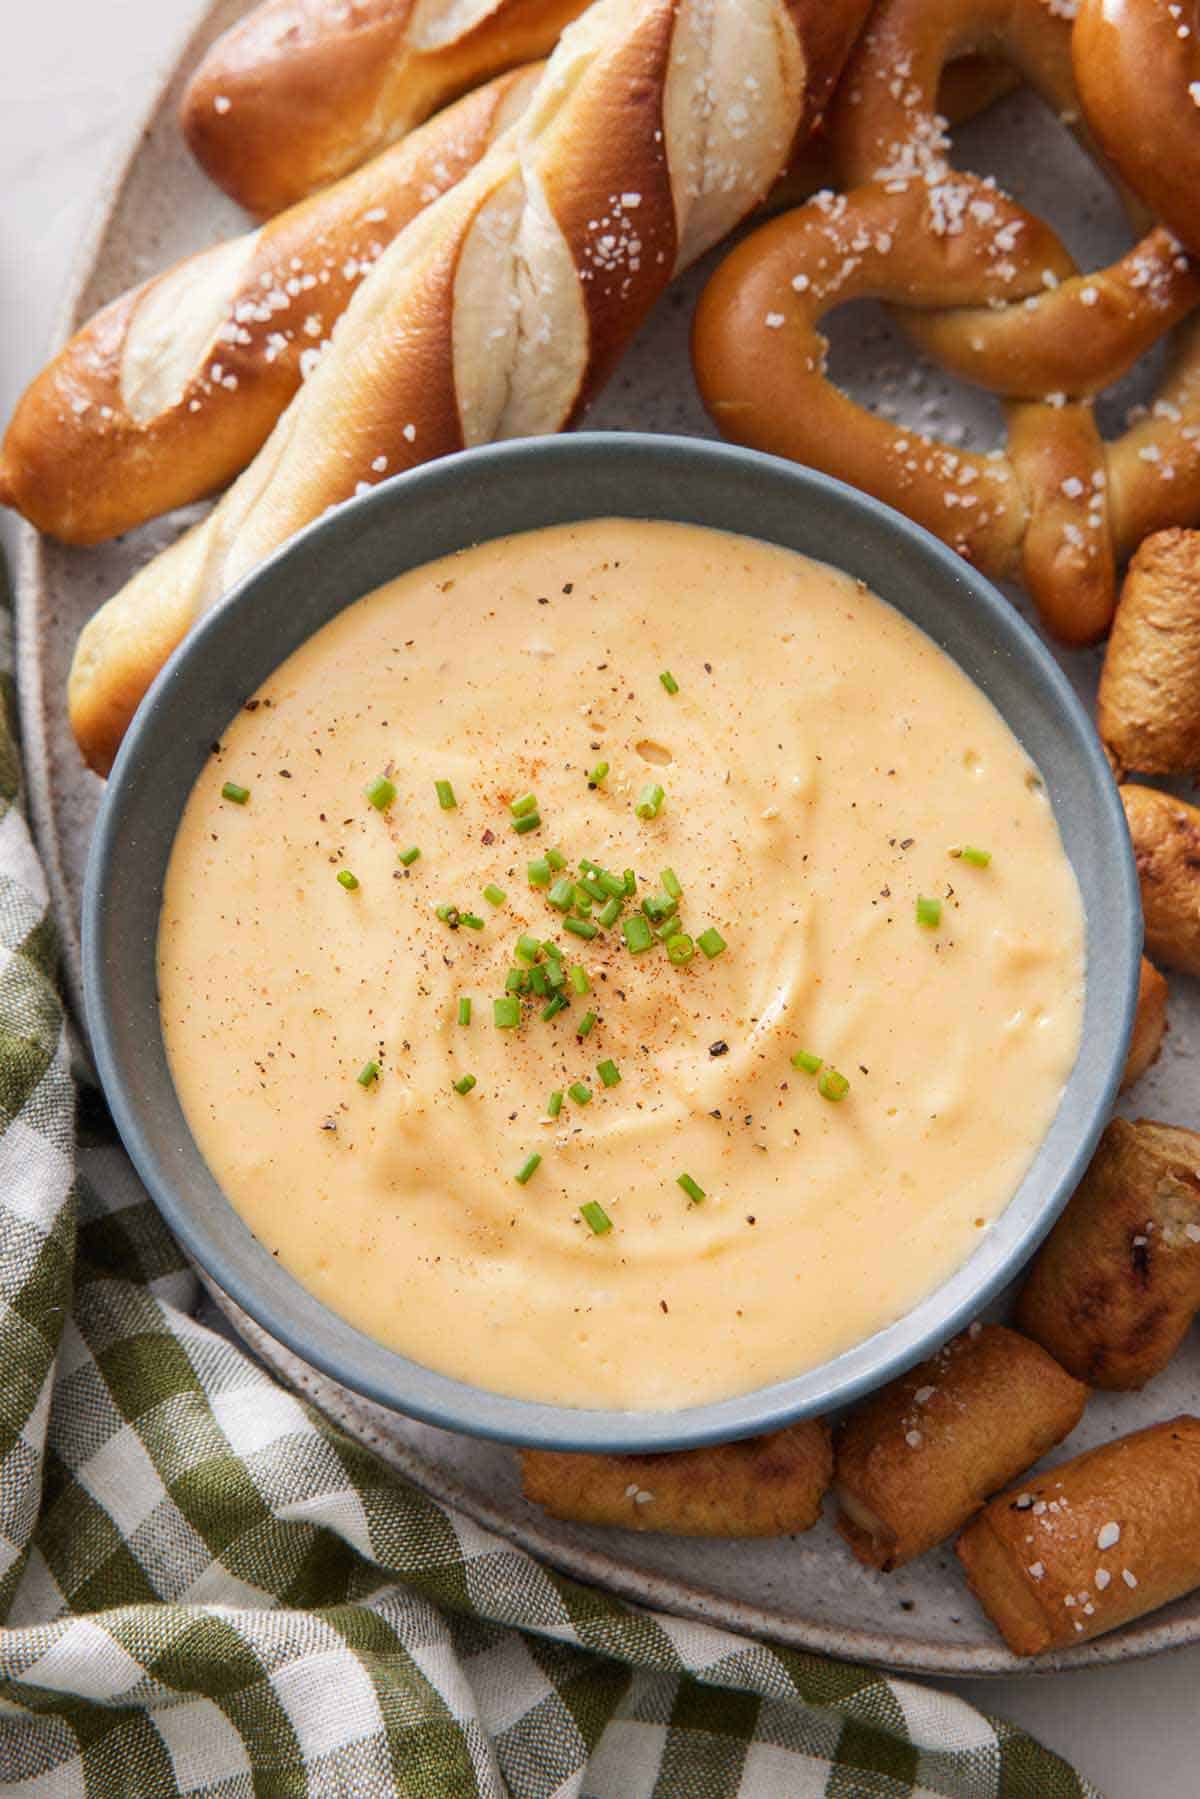 Overhead view of a bowl of beer cheese dip surrounded by pretzels.